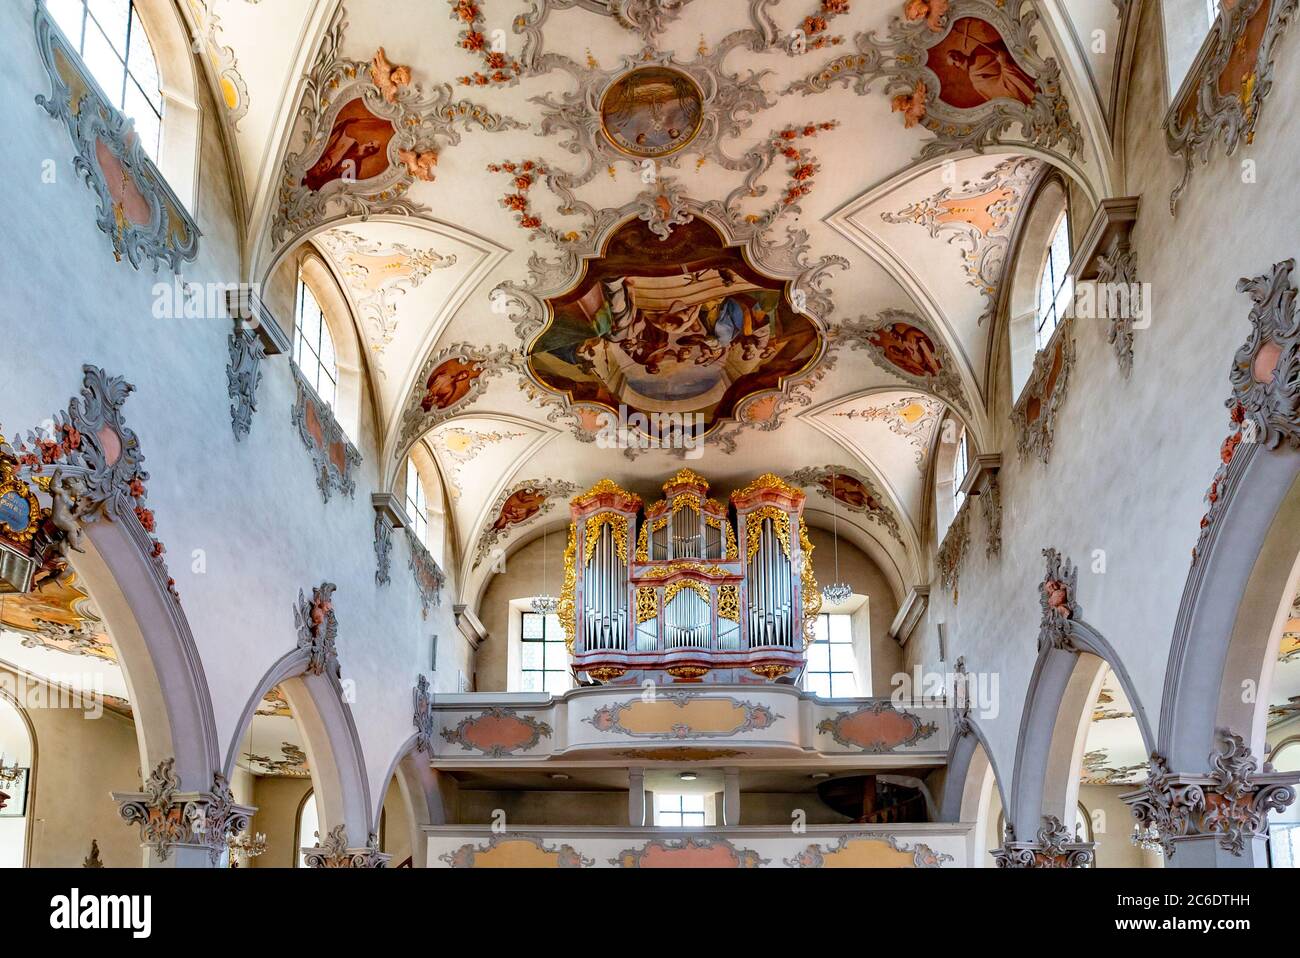 Laufenburg, AG / Switzerland - 4 July 2020: interior view of the St. Johann church in Laufenburg with the organ and ceiling paintings Stock Photo